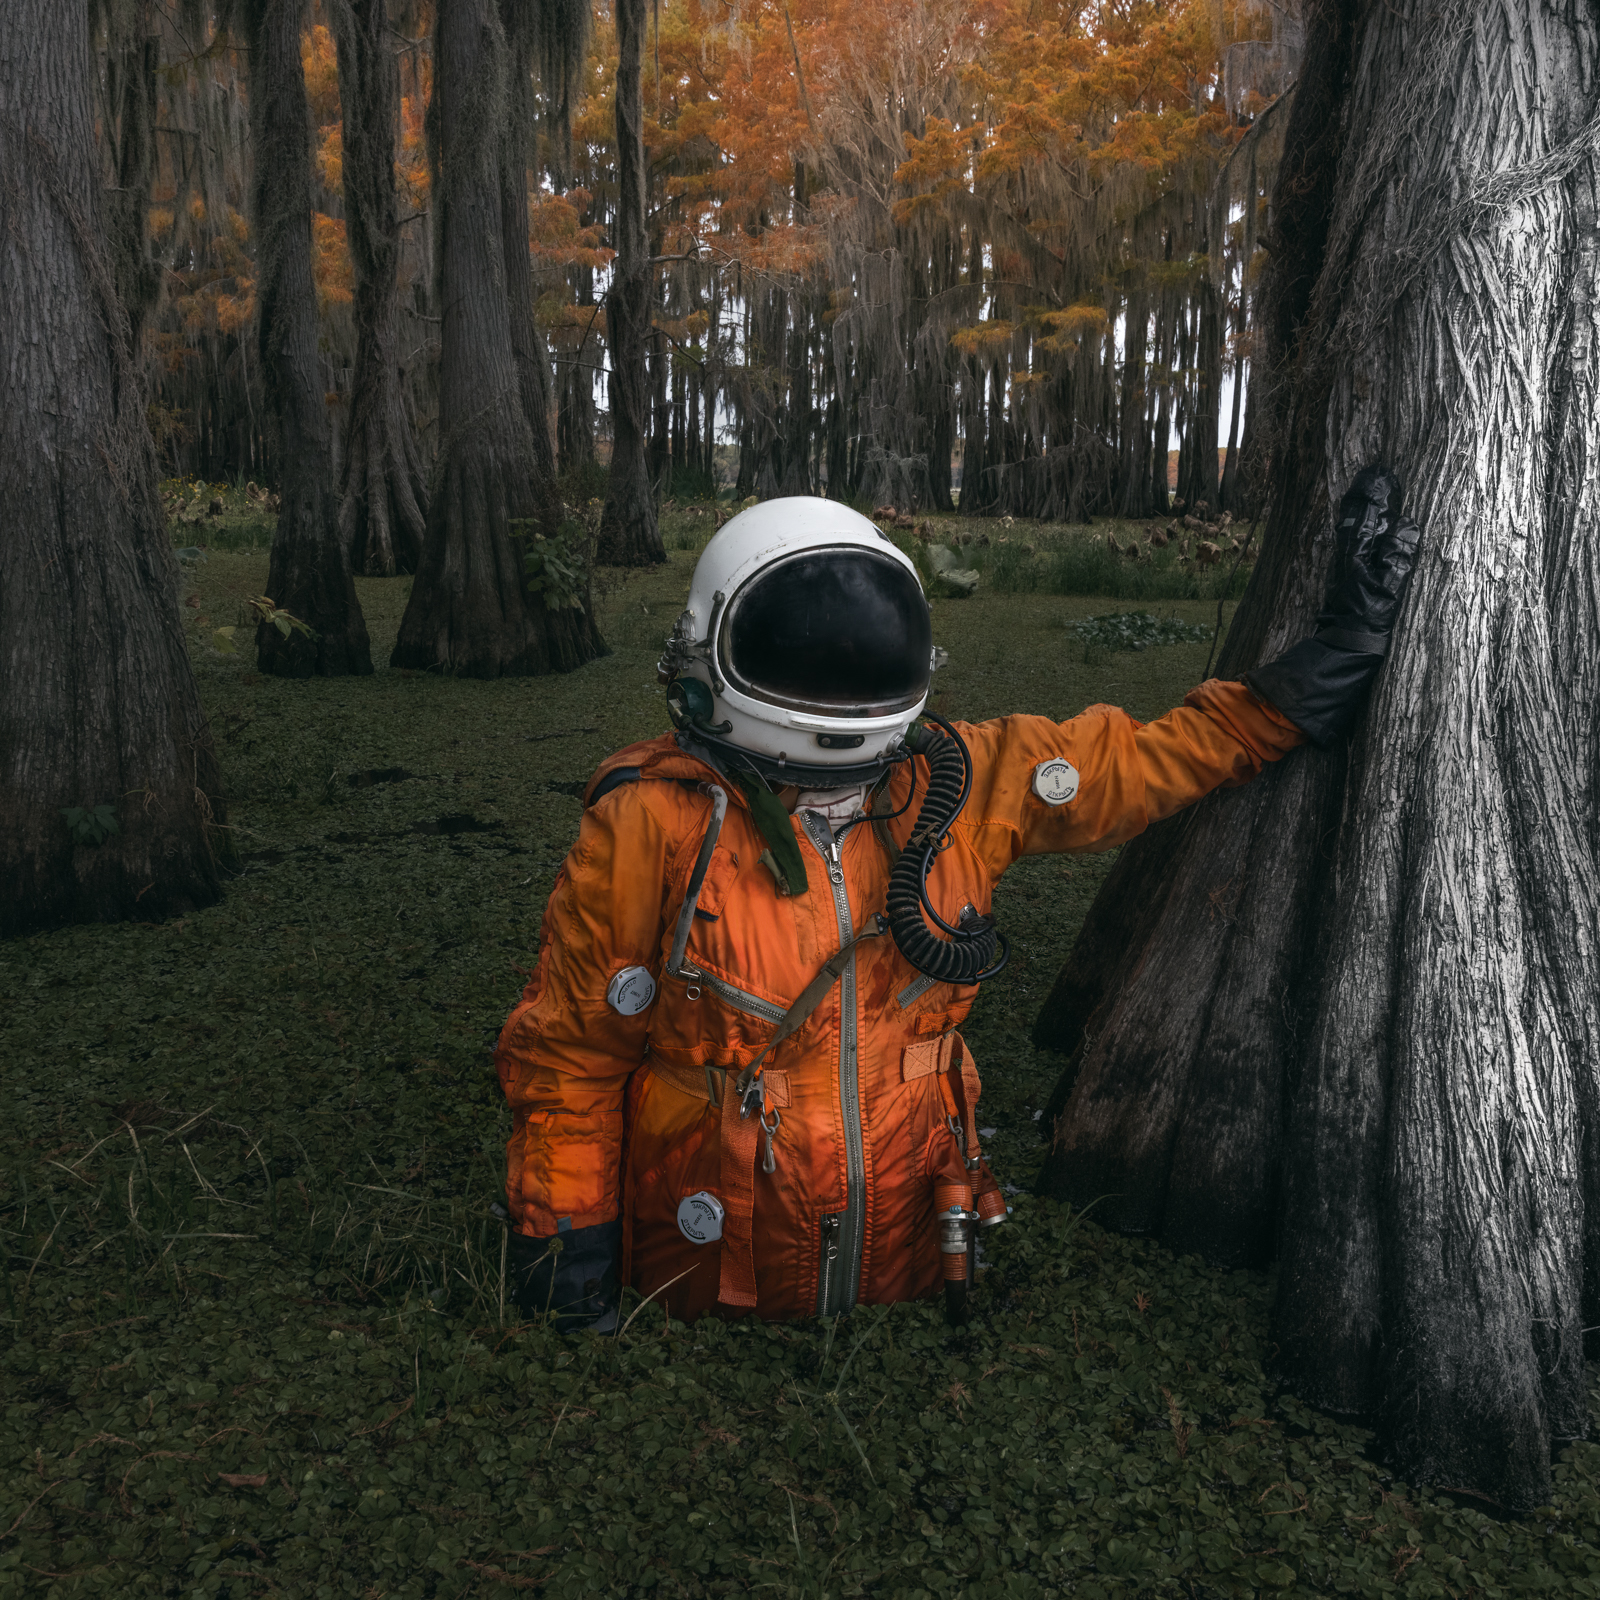 An astronaut makes their way through the otherworldly cypress tree swamps during the peak of autumn